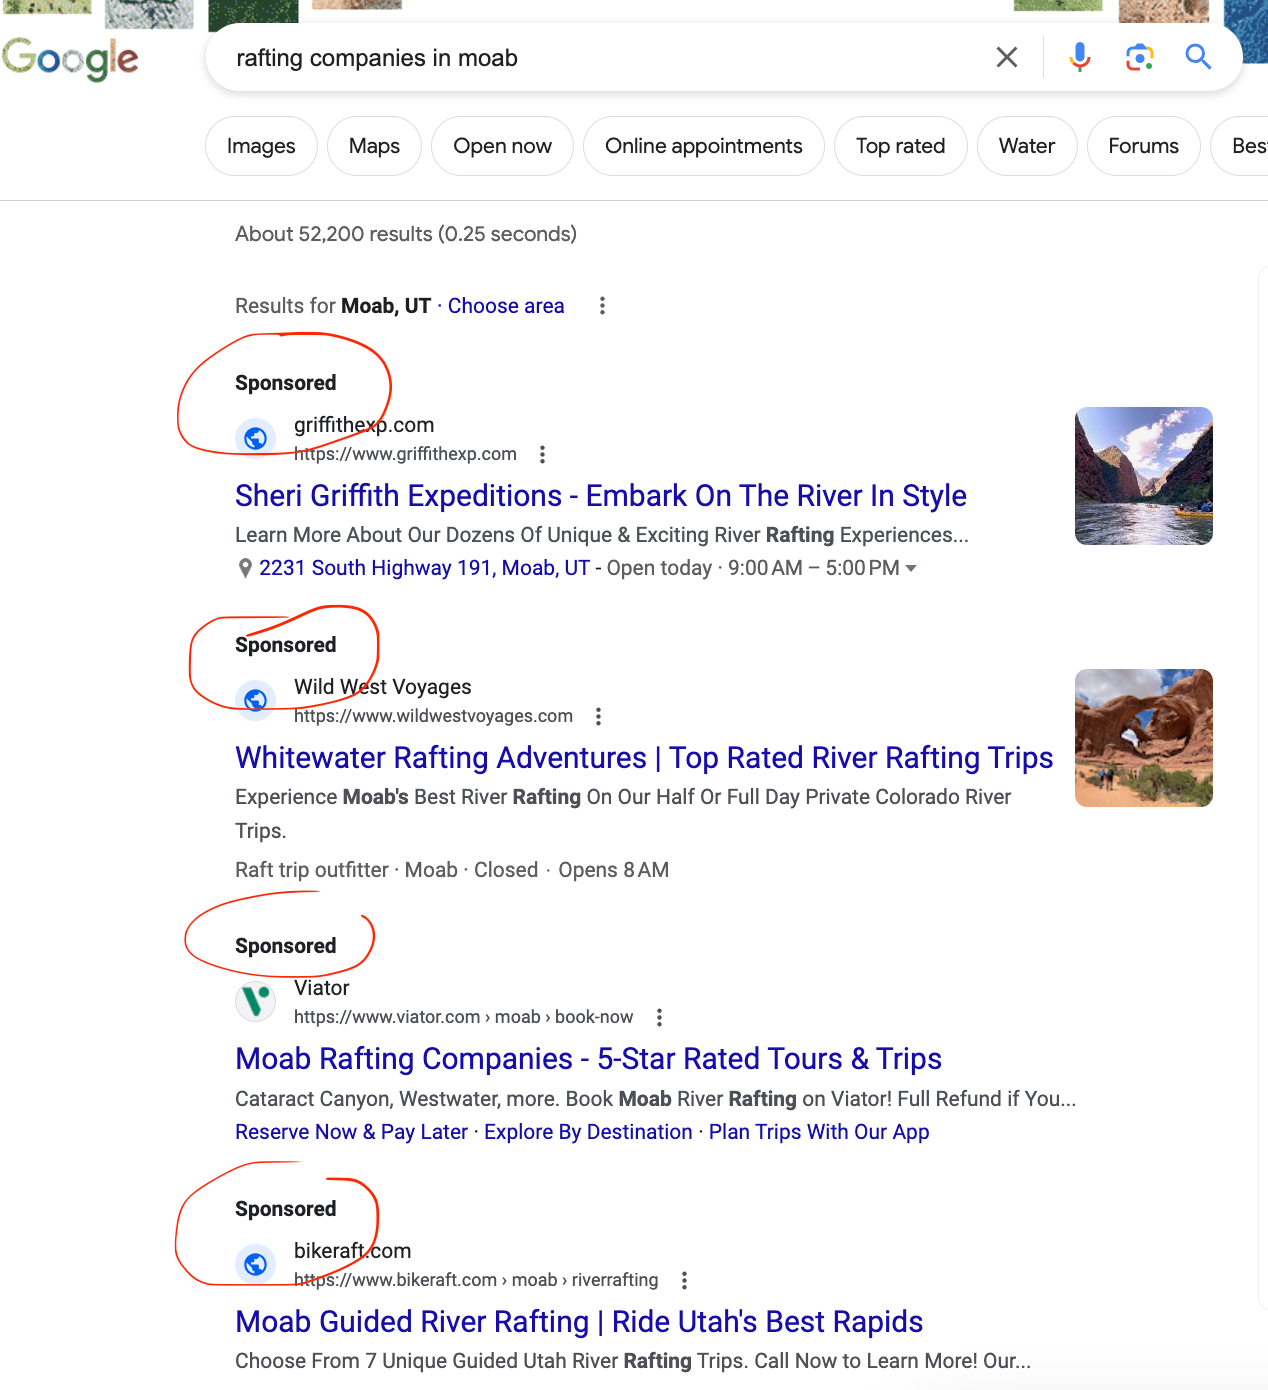 Image of the search engine results page showing rafting companies that are running paid ads